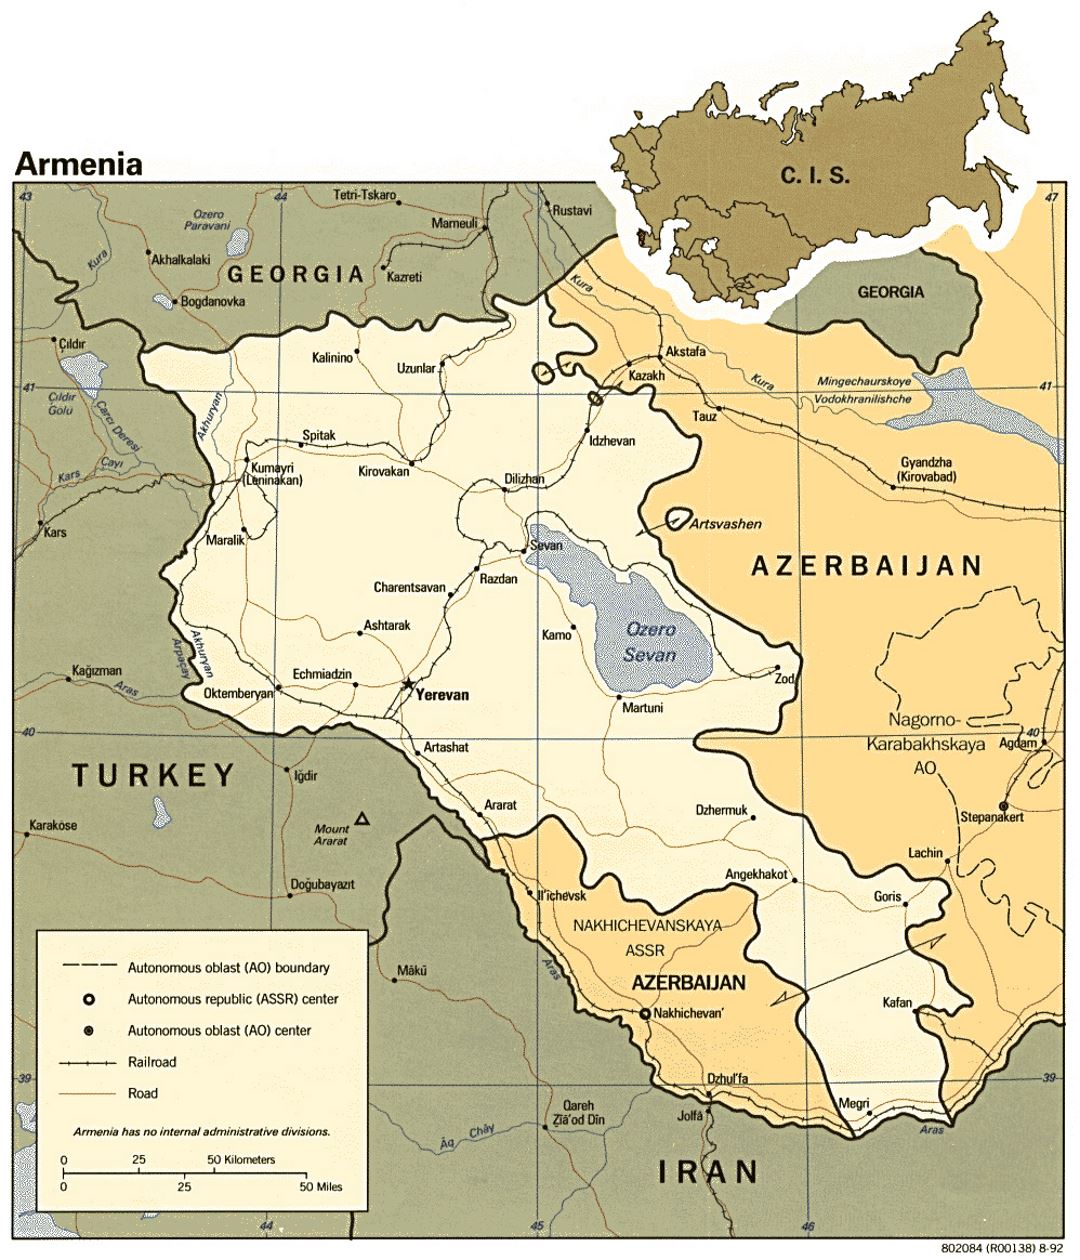 Detailed political map of Armenia with roads, railroads and major cities - 1992